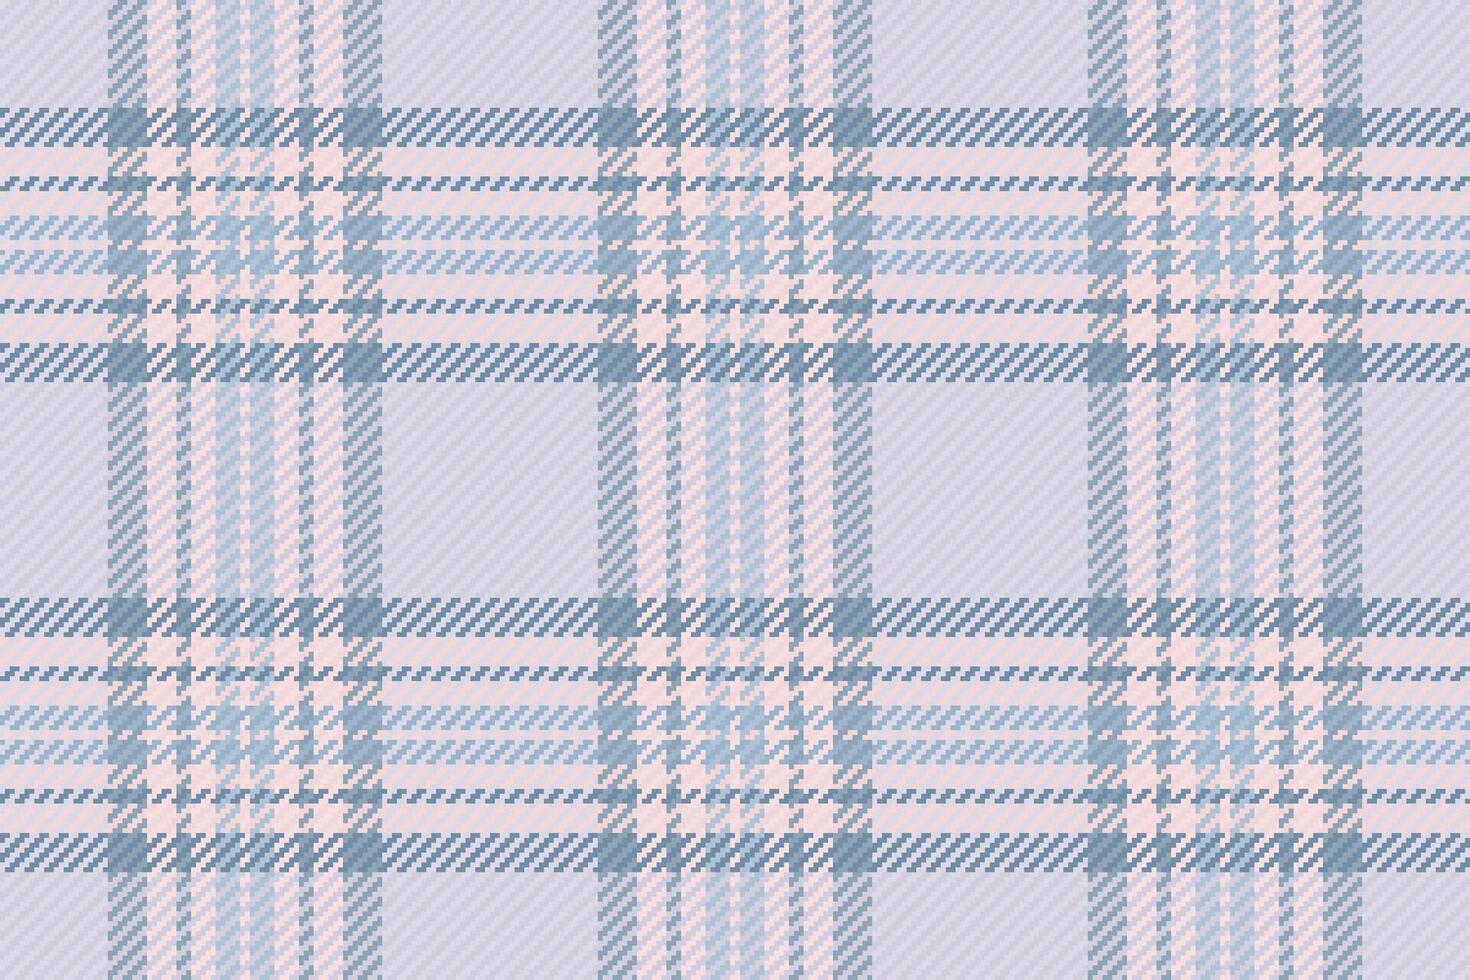 60s tartan texture seamless, track check pattern background. Hanukkah plaid vector textile fabric in white and light colors.